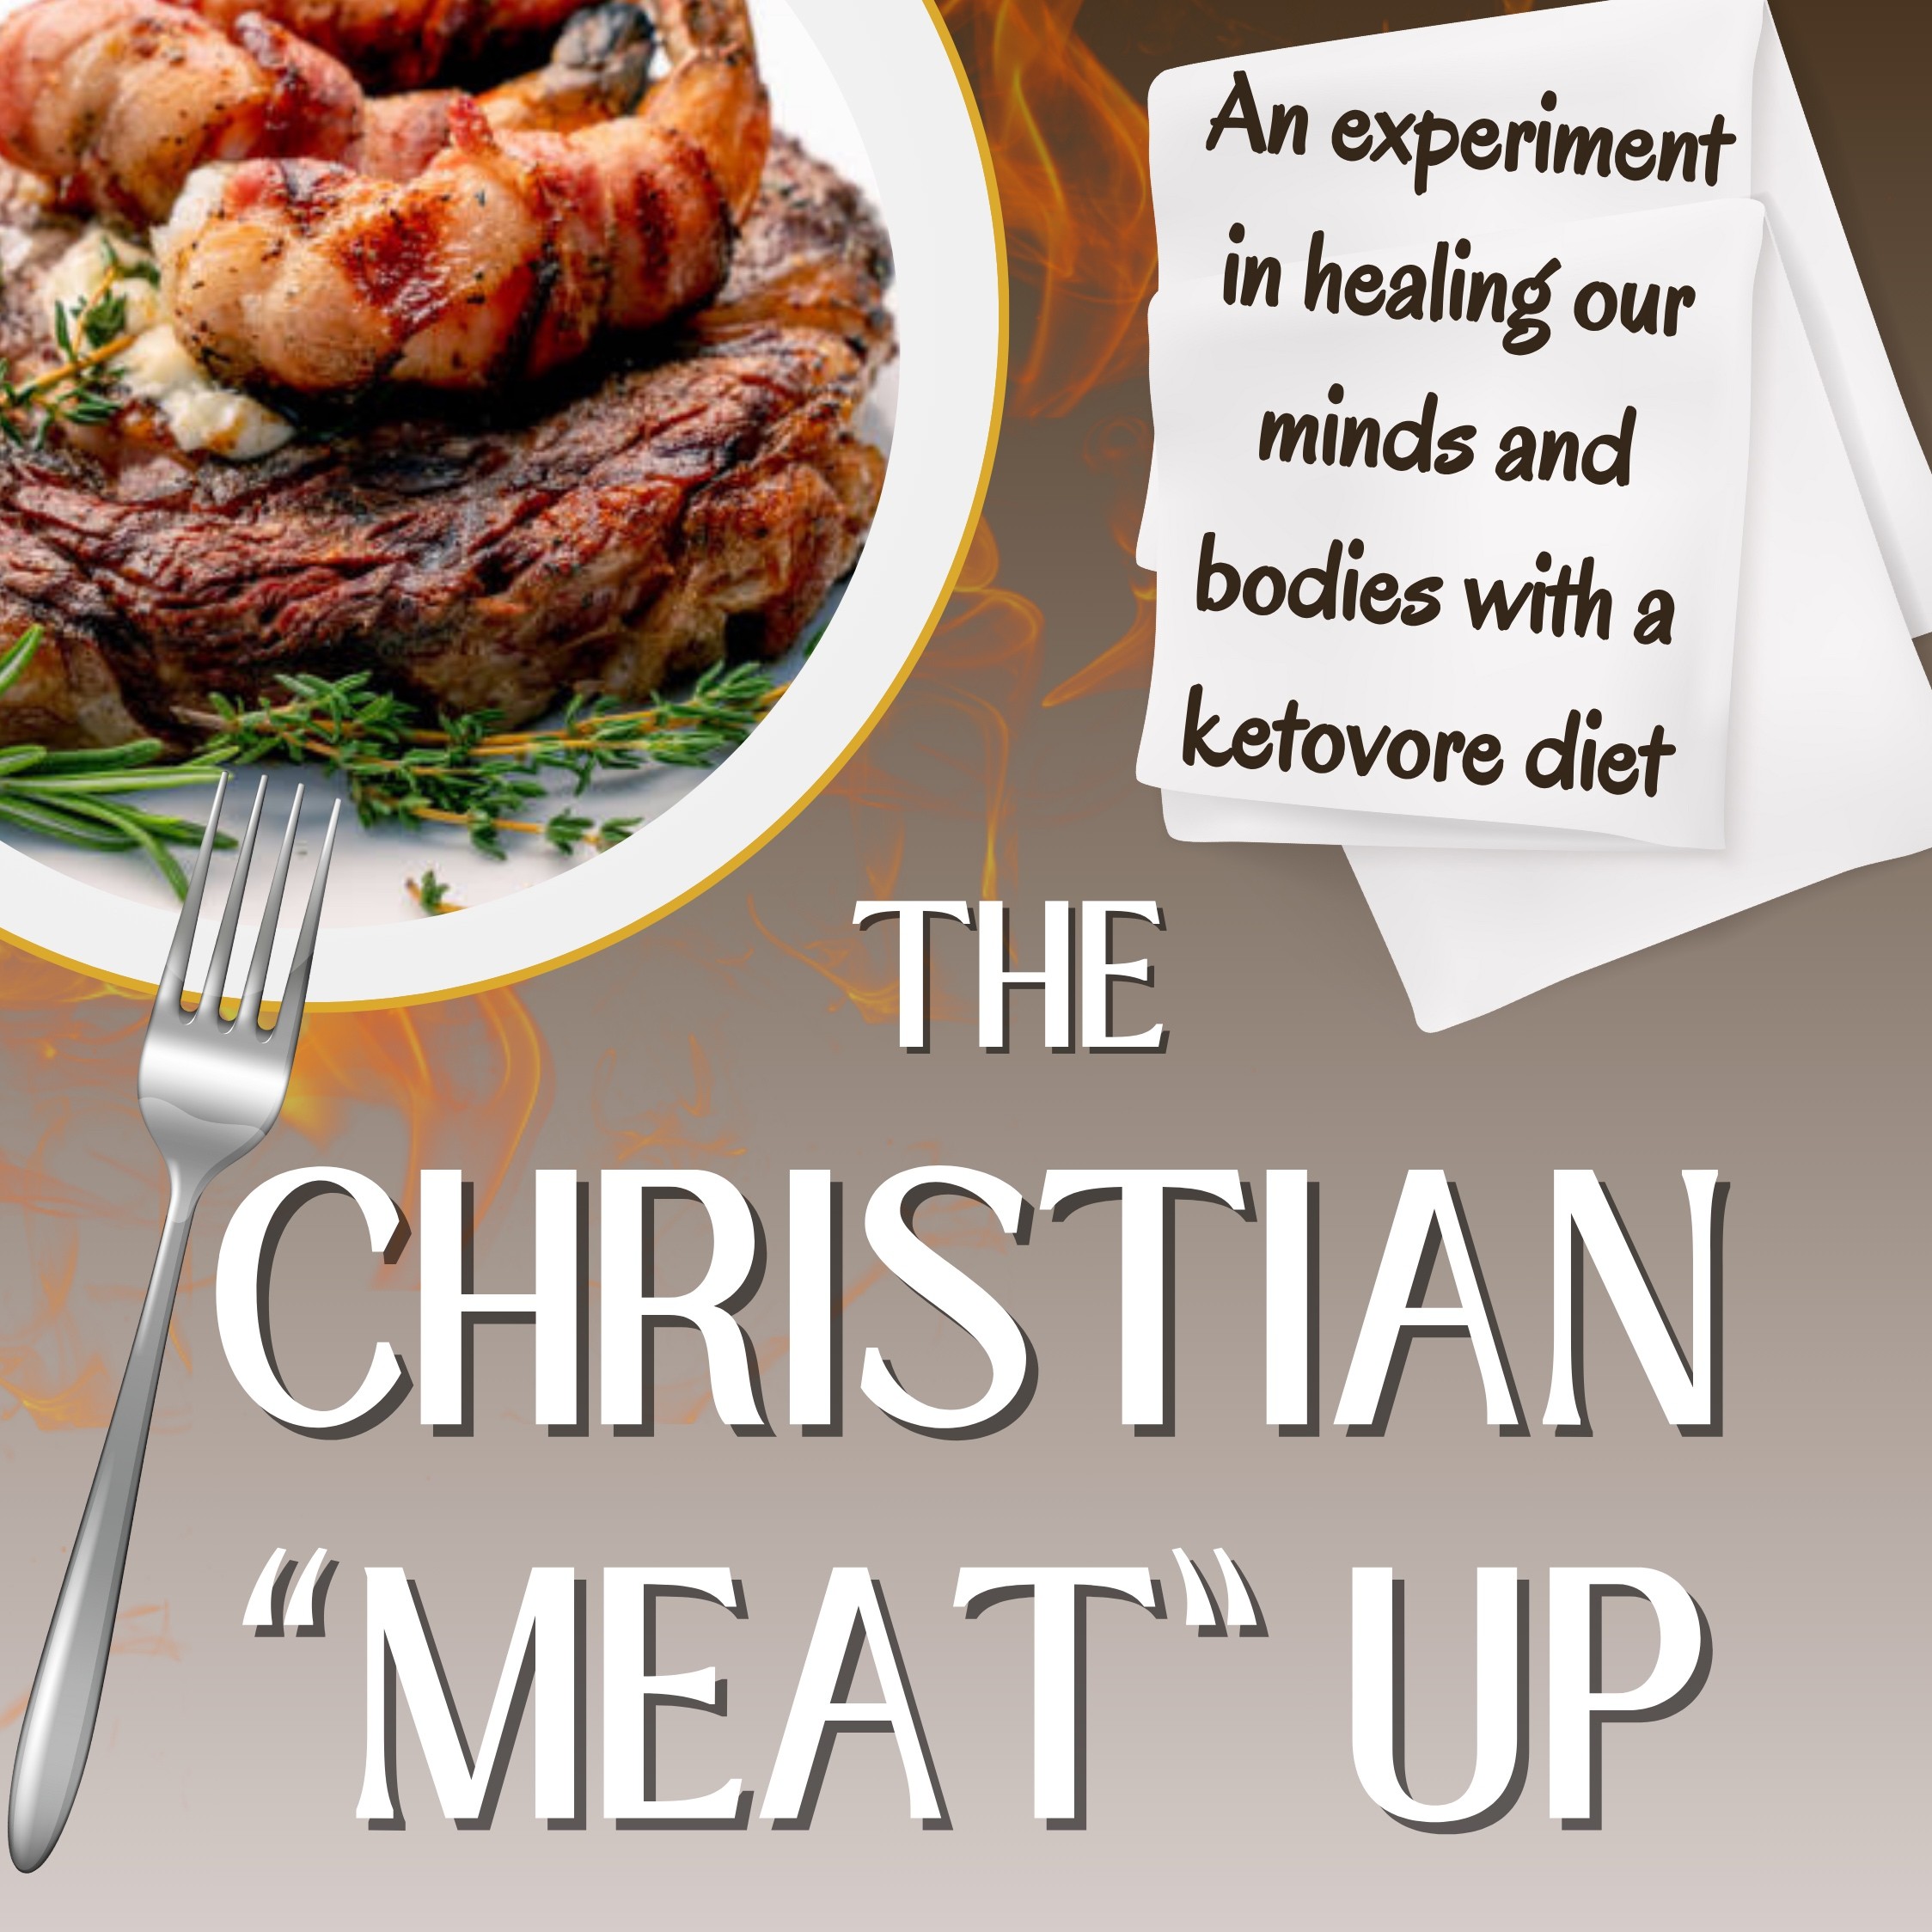 The Christian ”Meat” Up